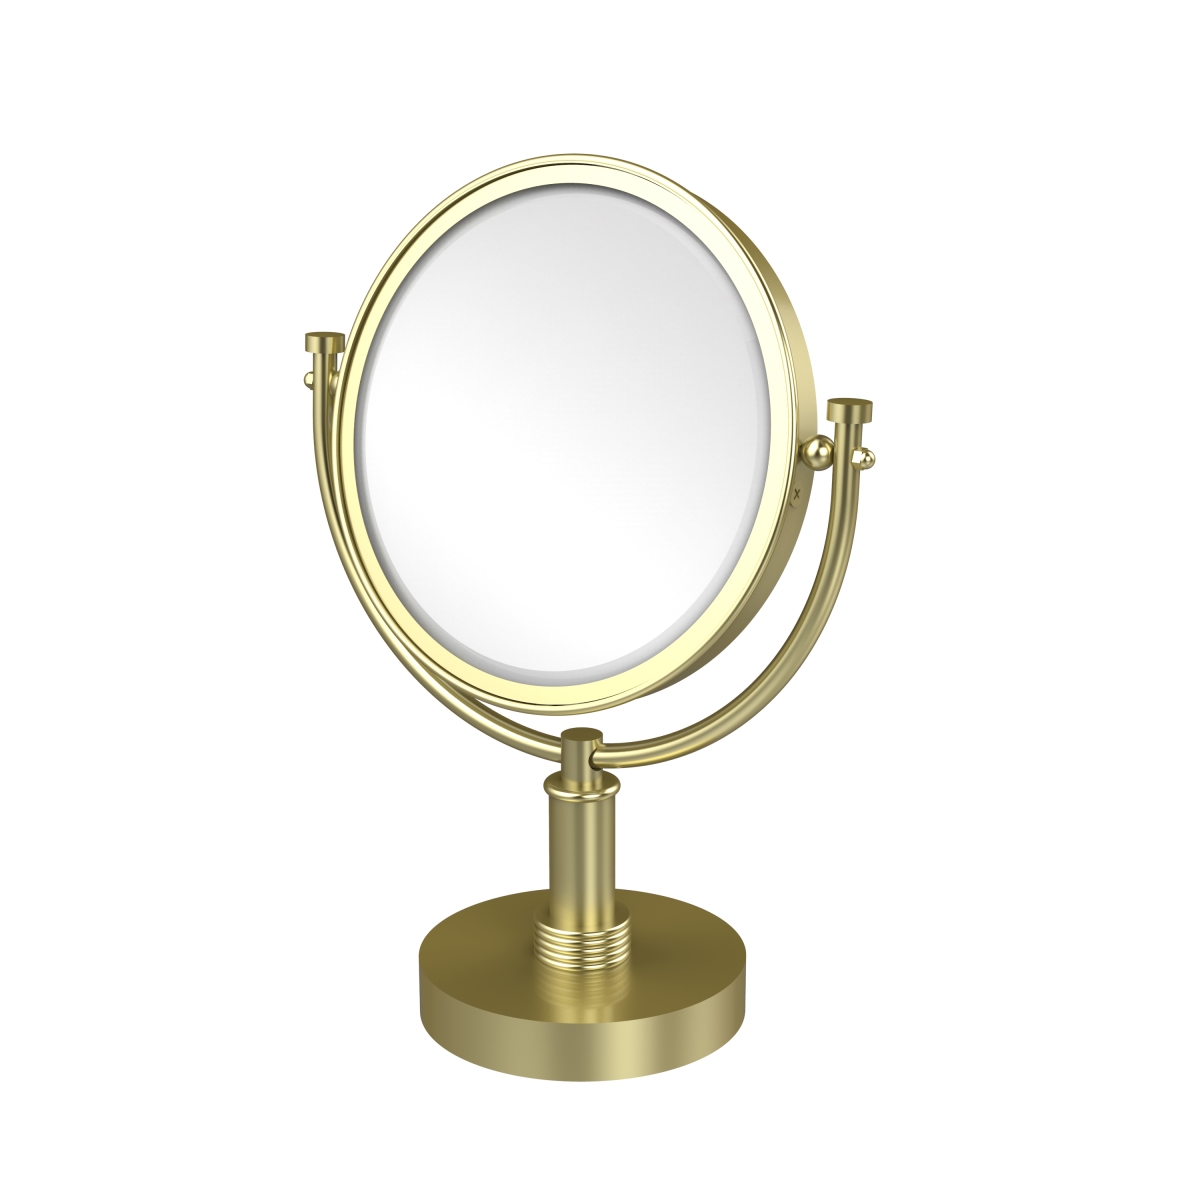 Picture of Allied Brass DM-4G-2X-SBR Grooved Ring Style 8 in. Vanity Top Make-Up Mirror 2X Magnification, Satin Brass